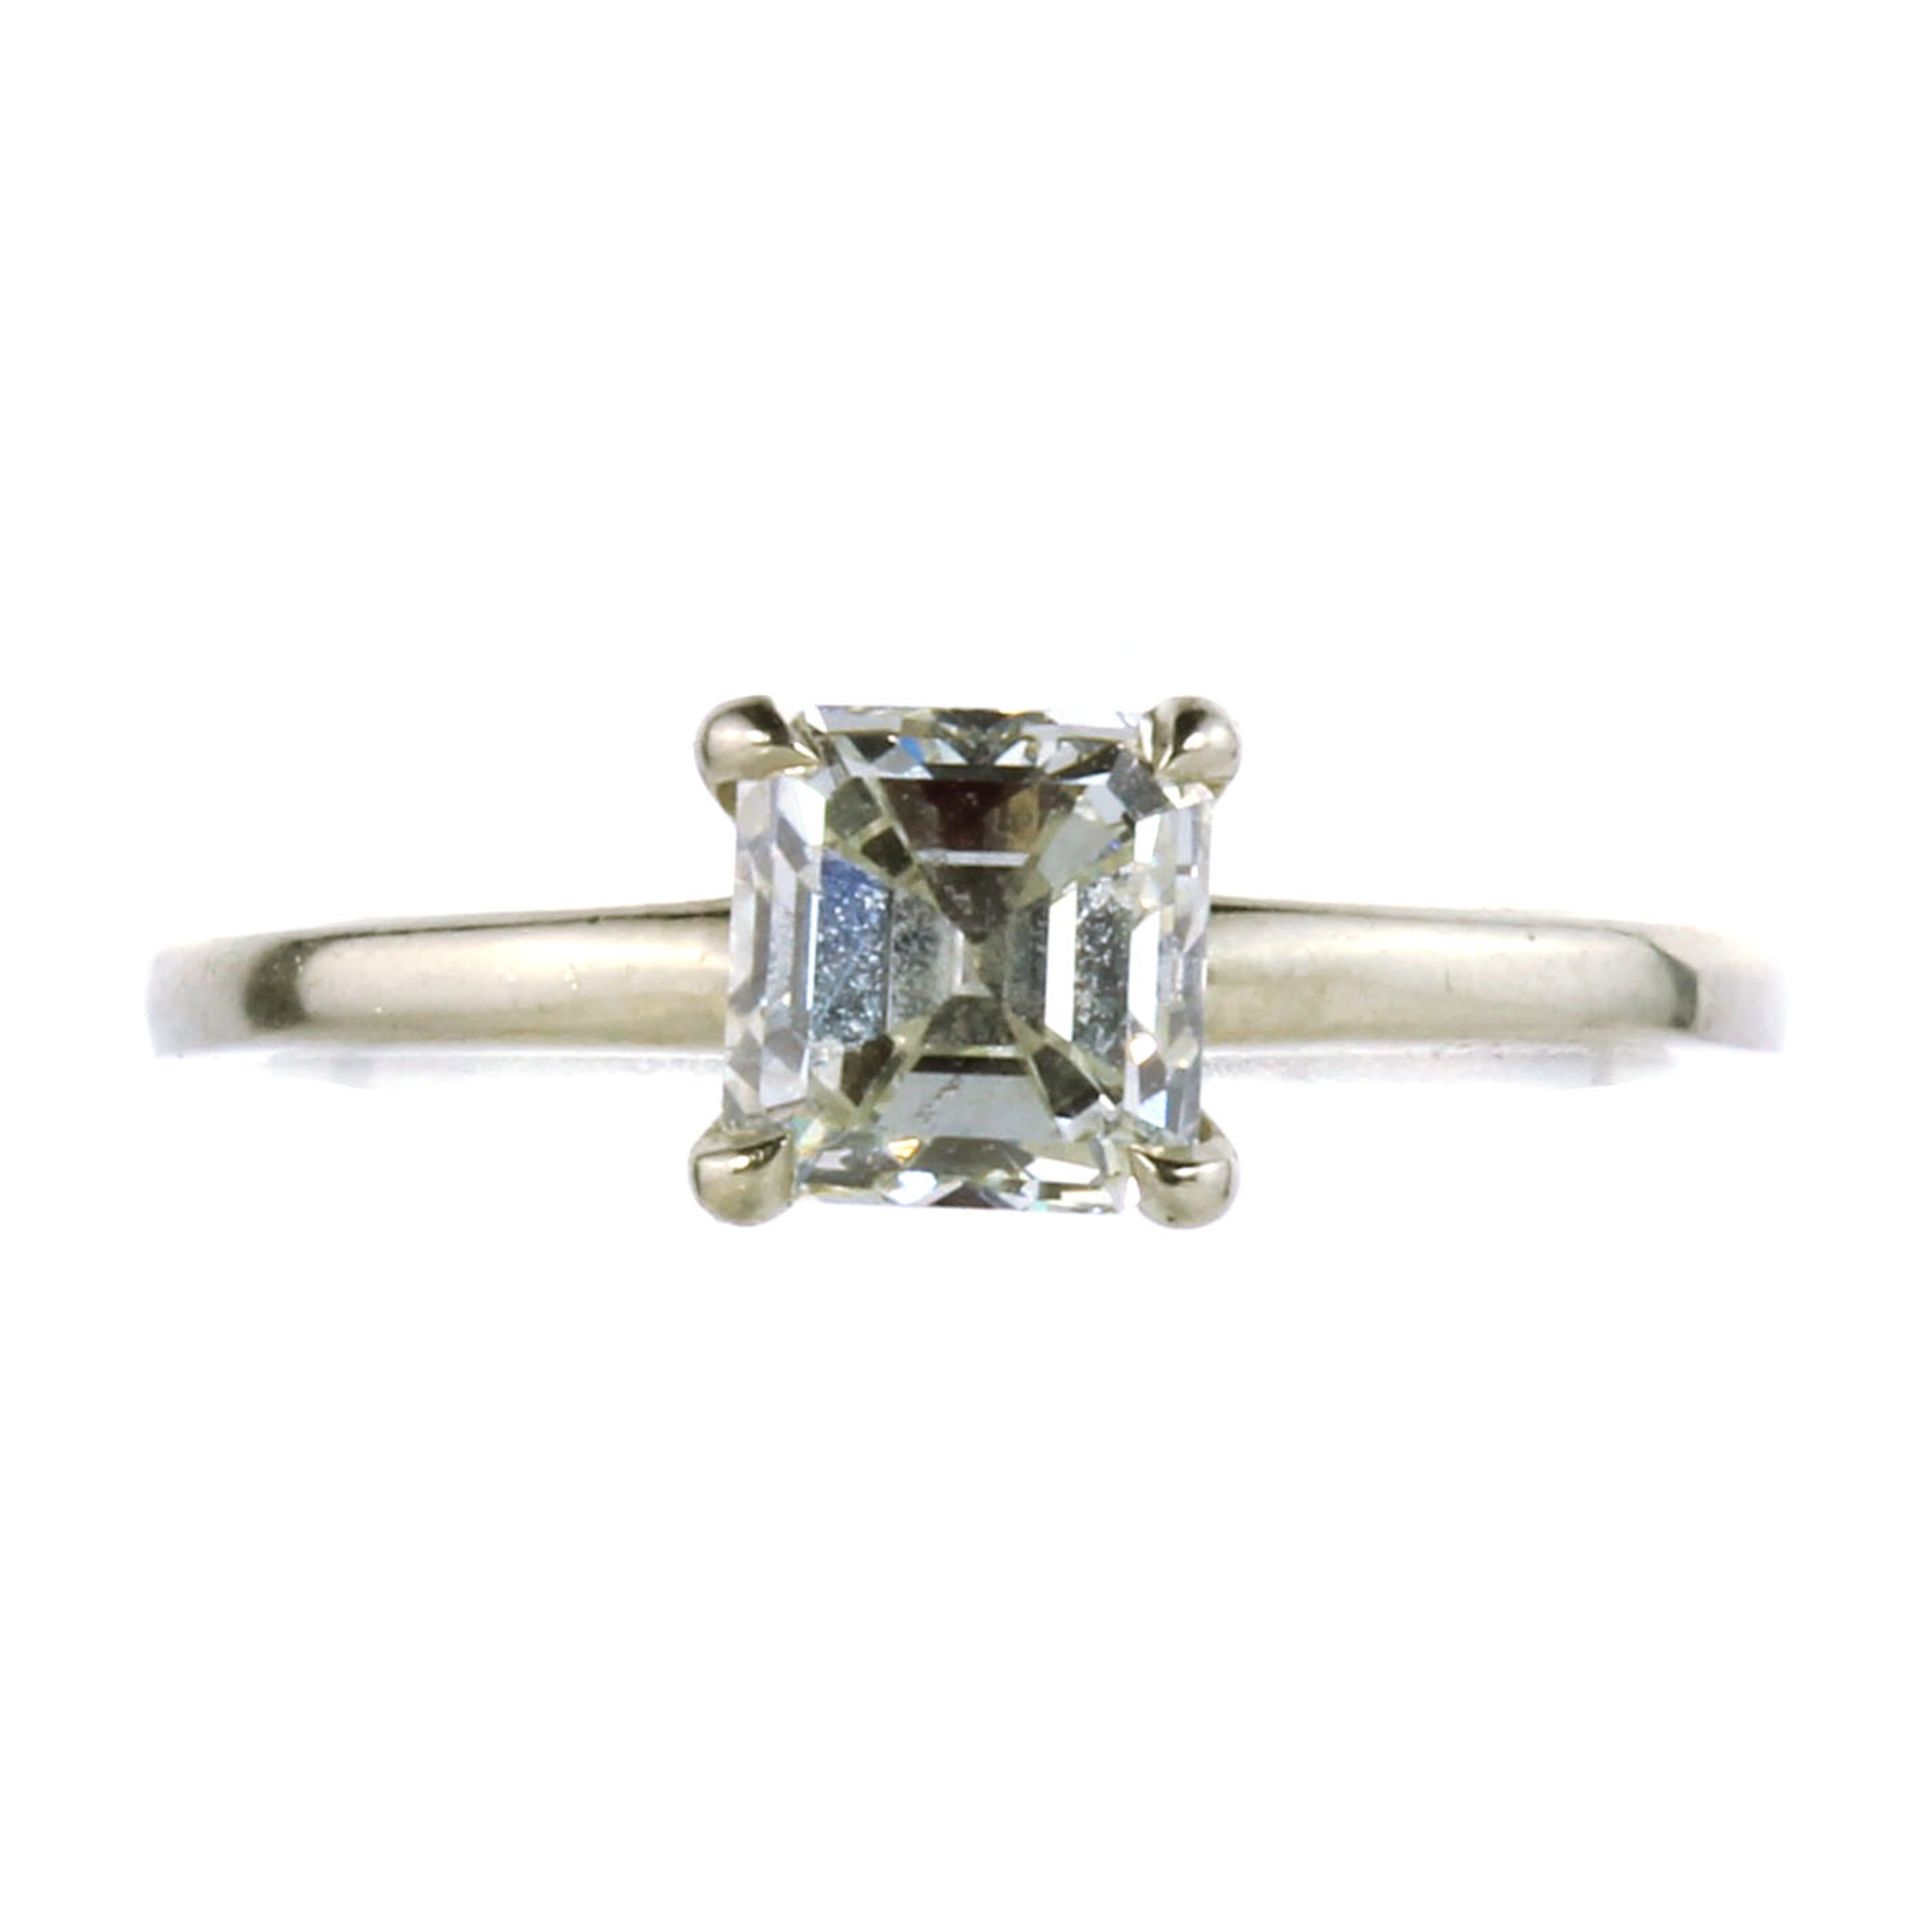 A 1.08 CARAT SOLITAIRE DIAMOND ENGAGEMENT RING in white gold, set with a single princess cut diamond